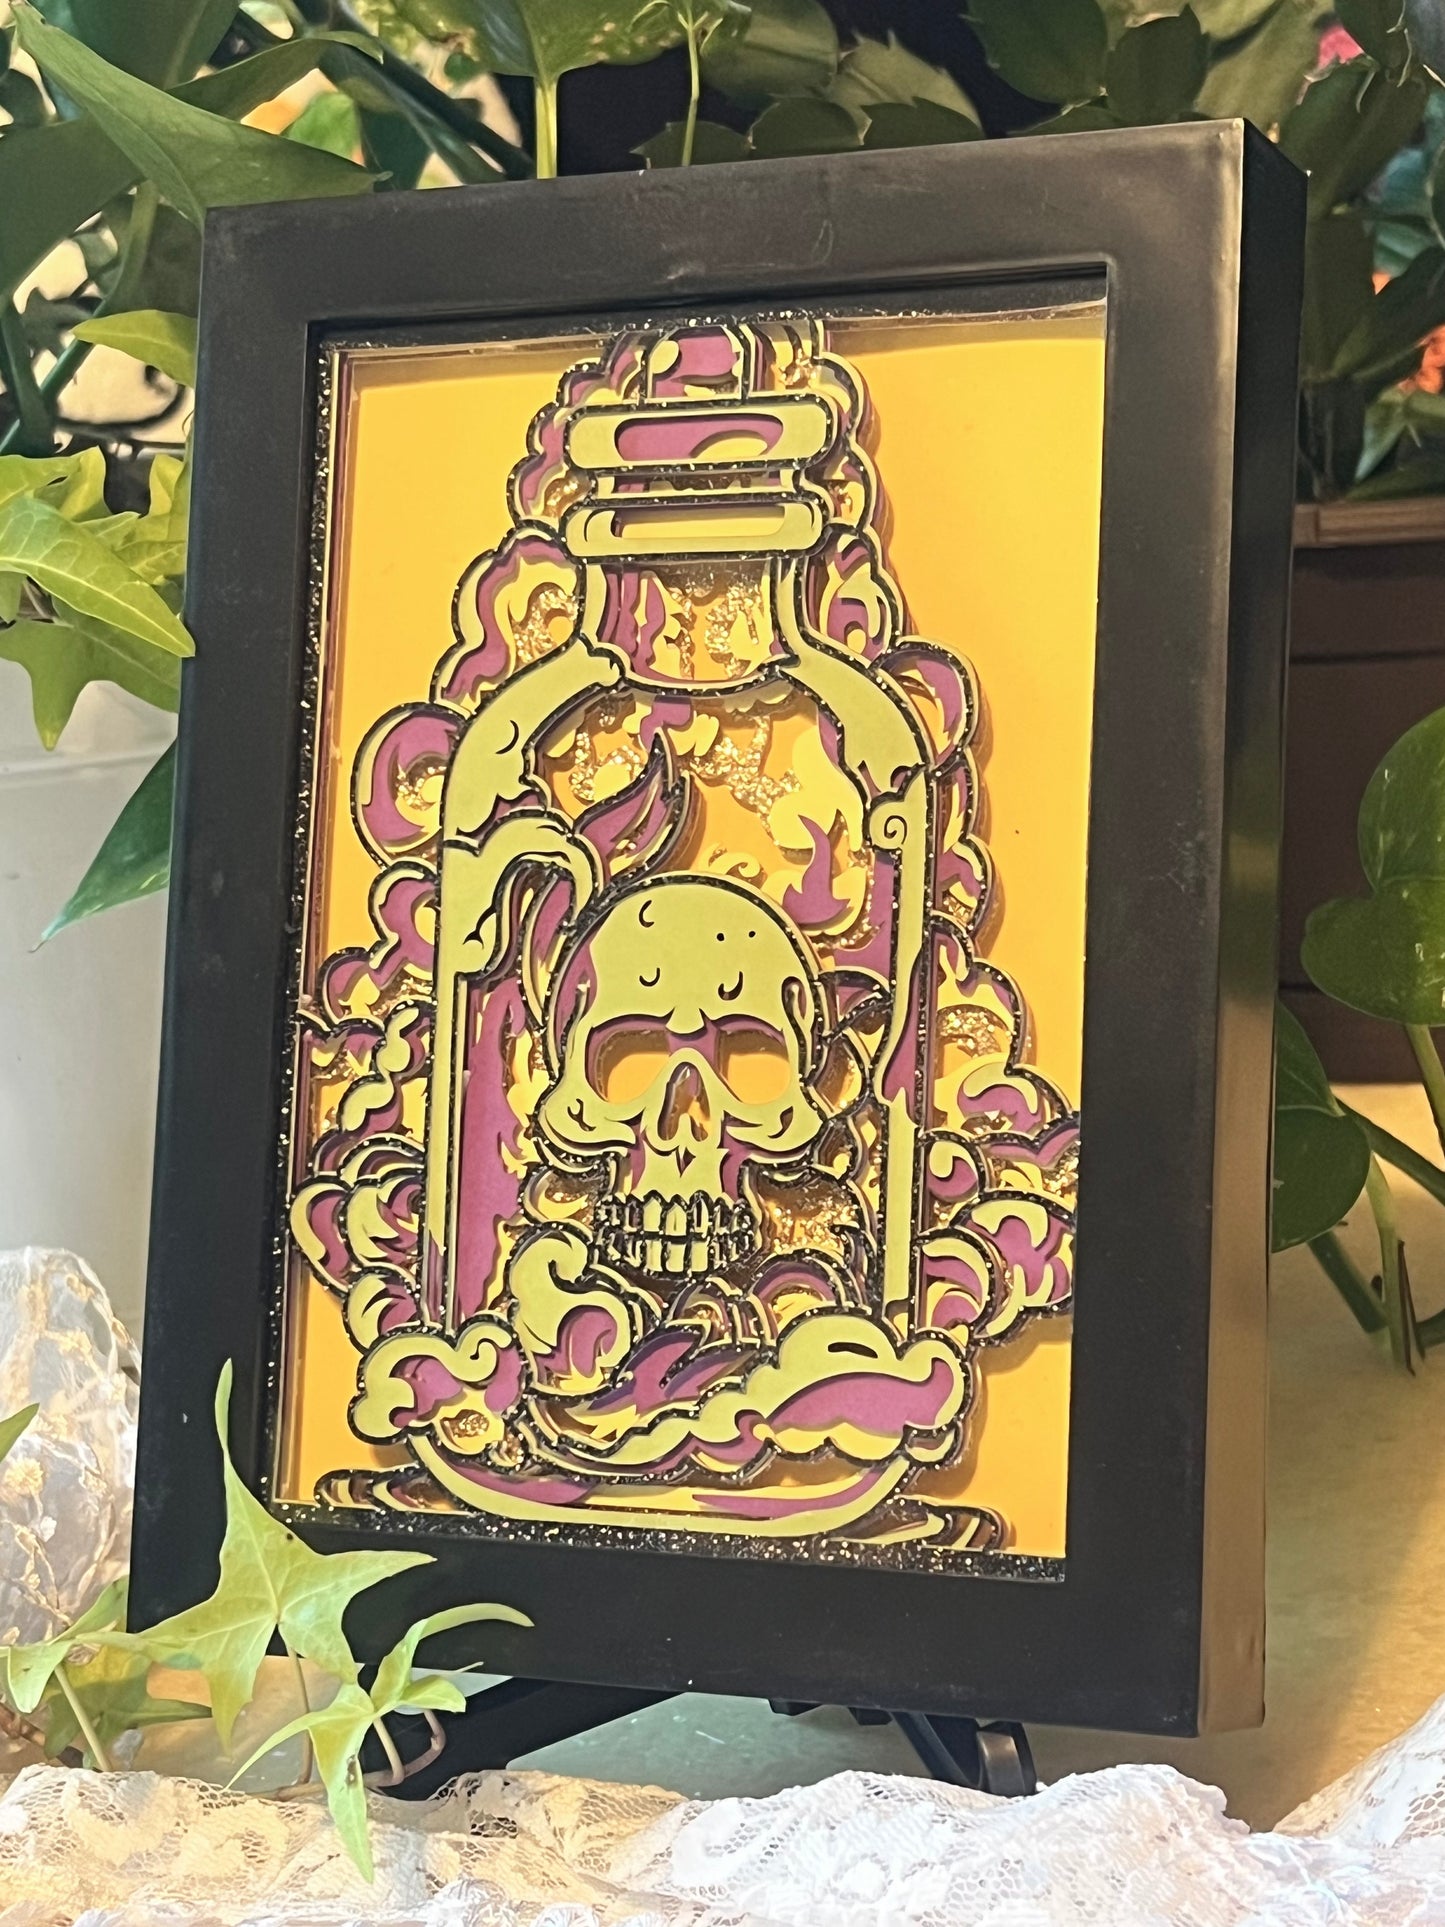 Skull in Apothecary Jar, Shadowbox, Layered Cut Paper Artwork, 5x7 Framed